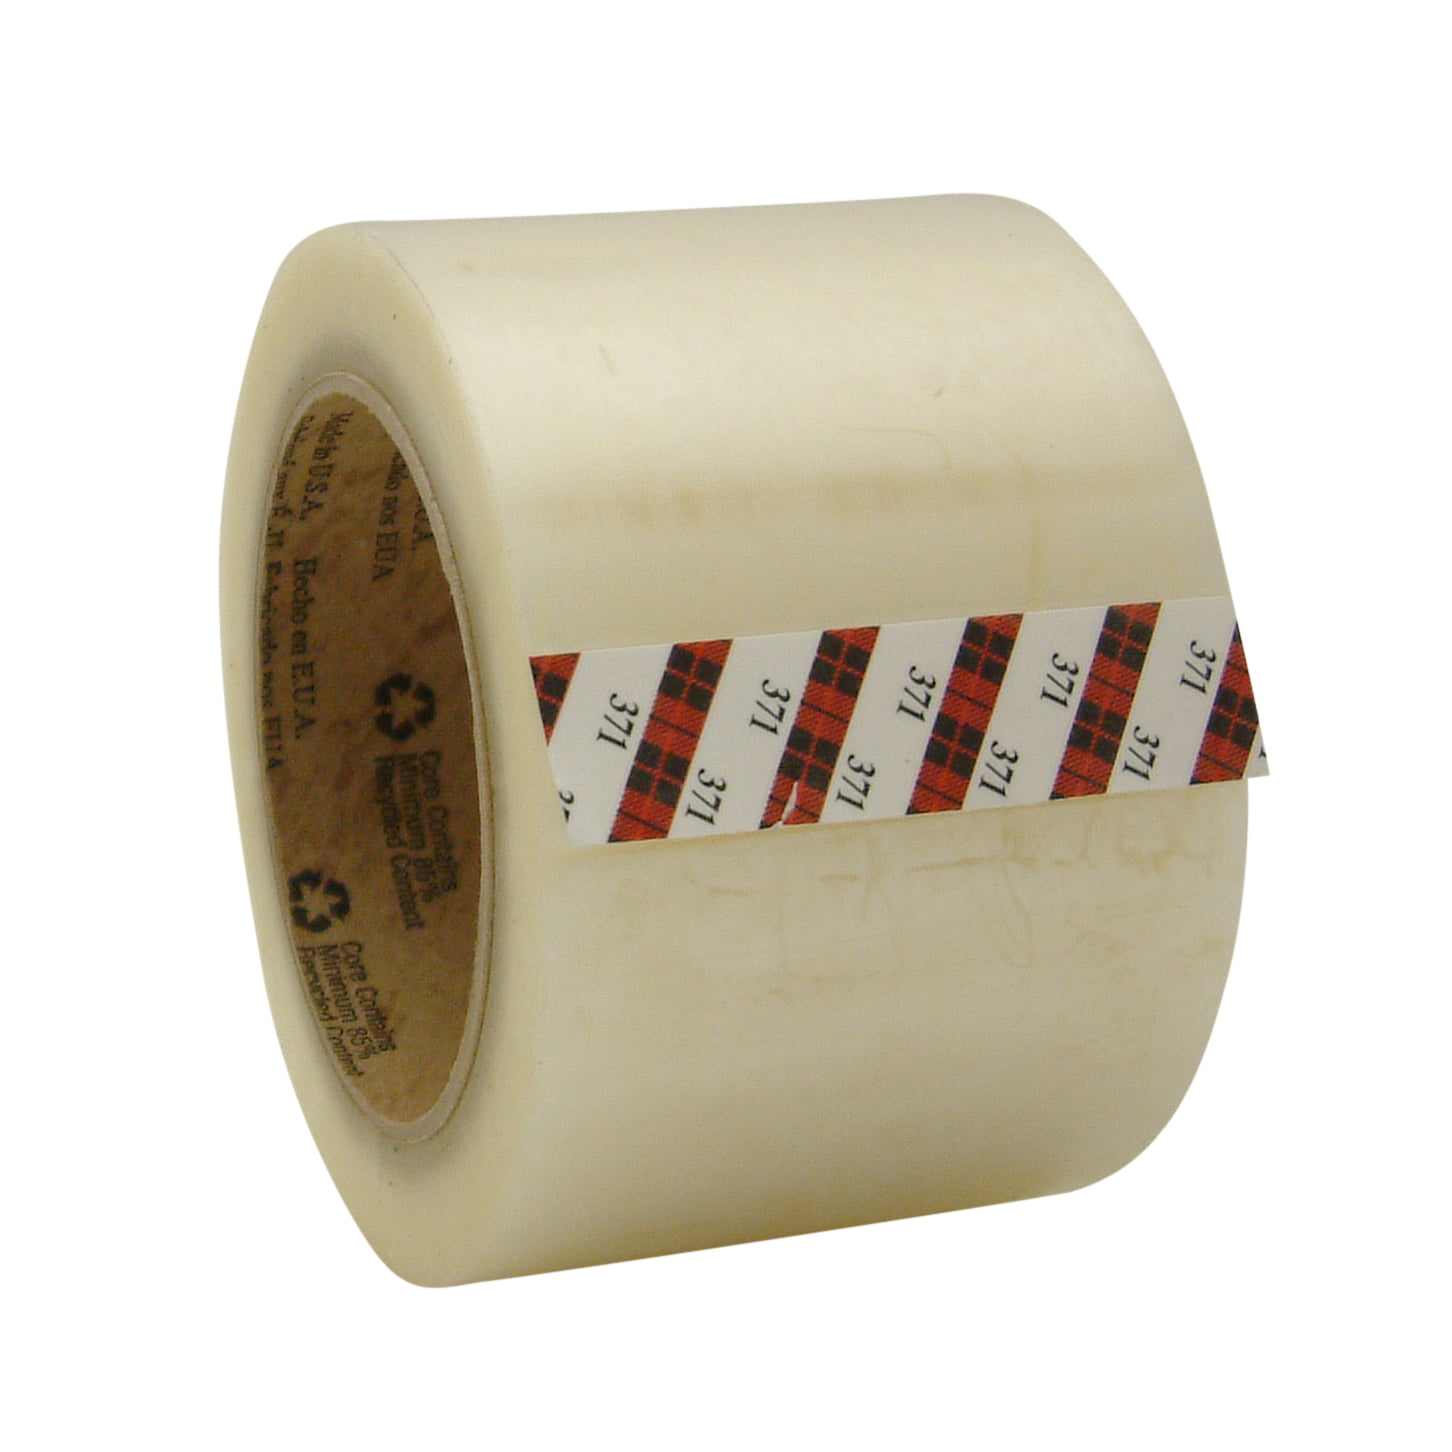 12 Rolls Brown Tapes 3M Scotch 371 Packing Box Sealing Buff Tapes 48mm X 66m 